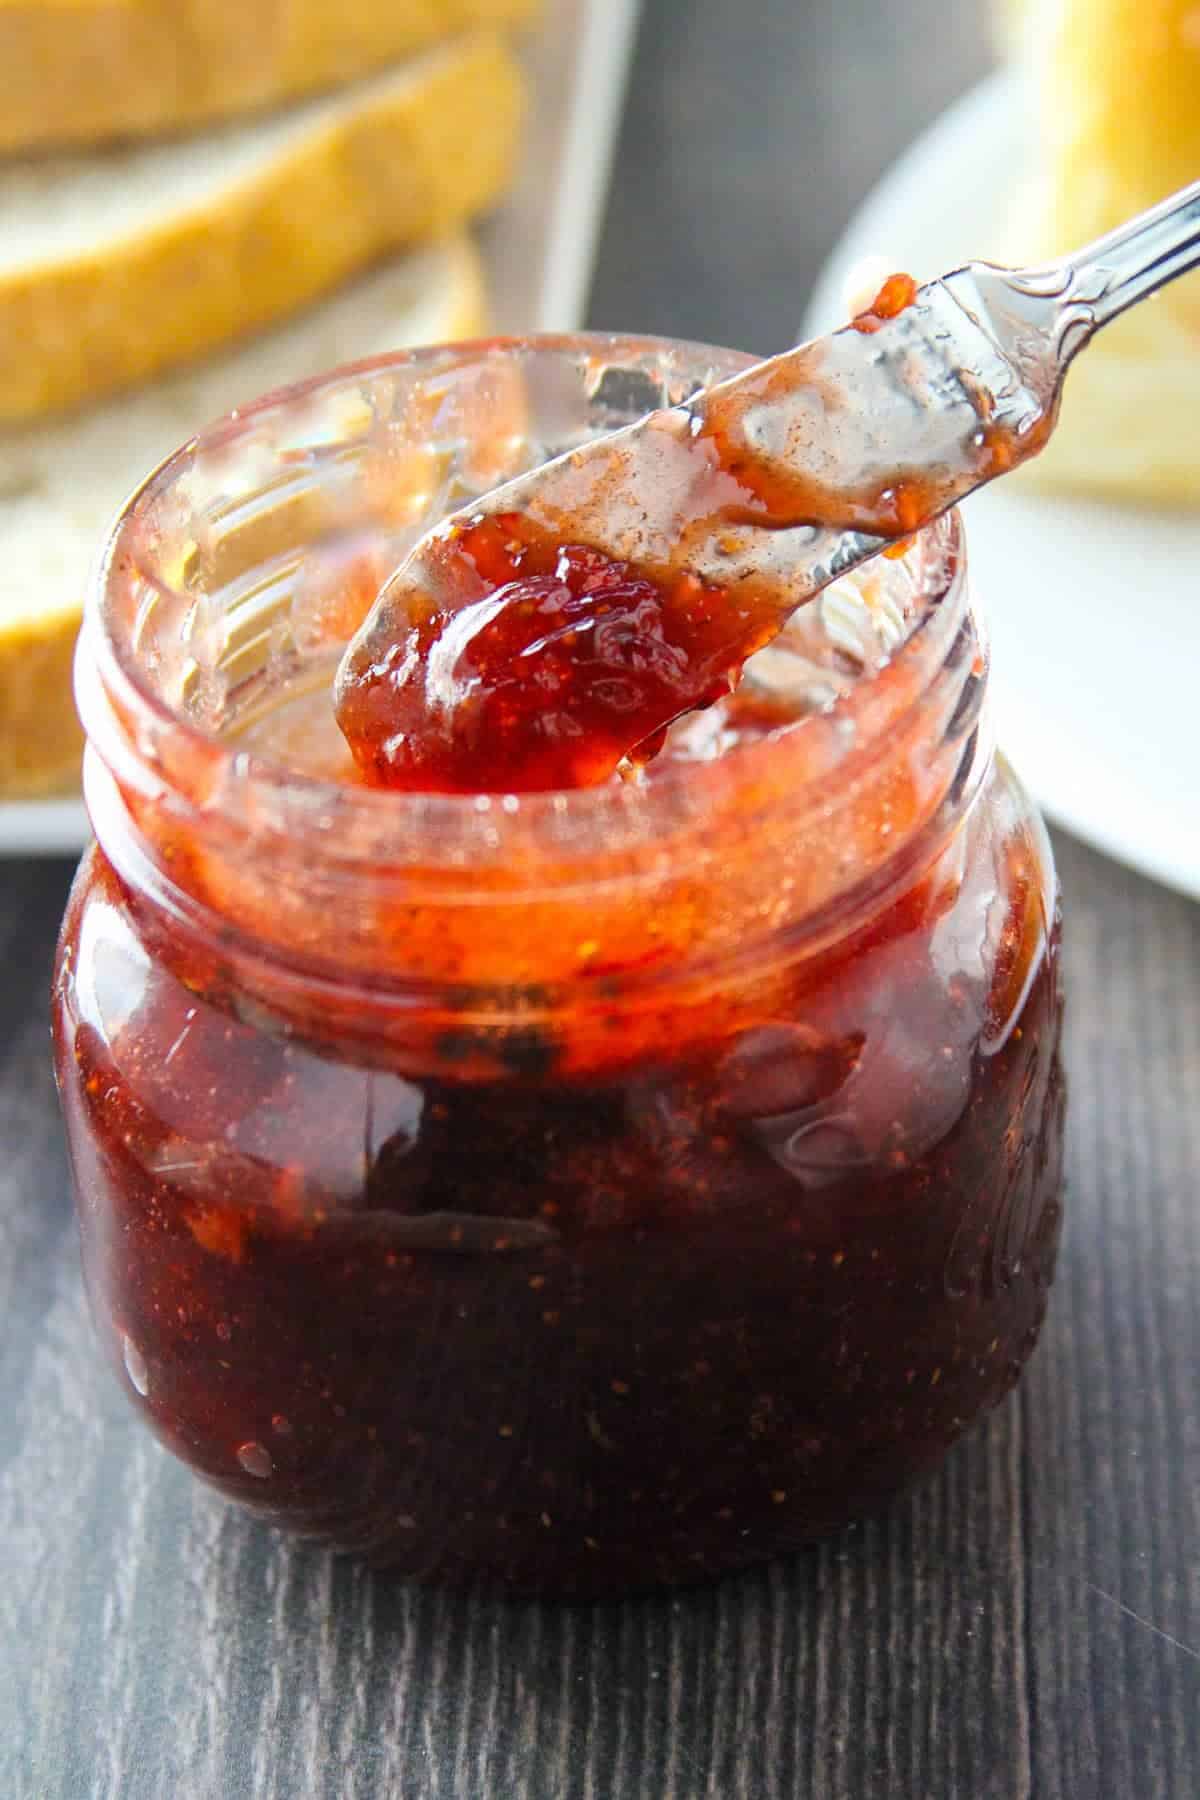 Serving Black Pepper Strawberry Jam from mason jar with a spoon